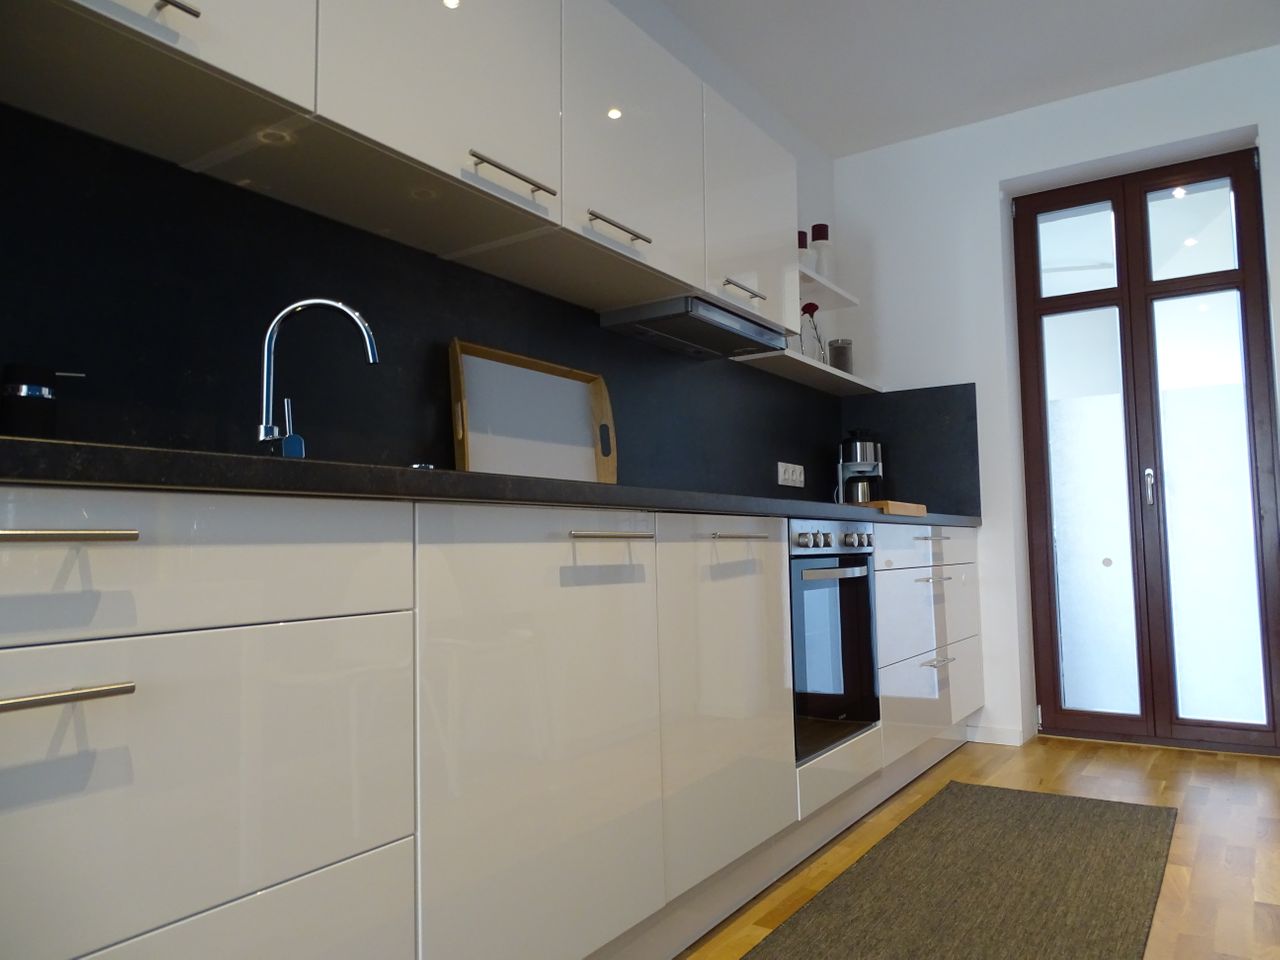 Lovingly furnished, fully equipped new apartment in Leipzig with top transport connections